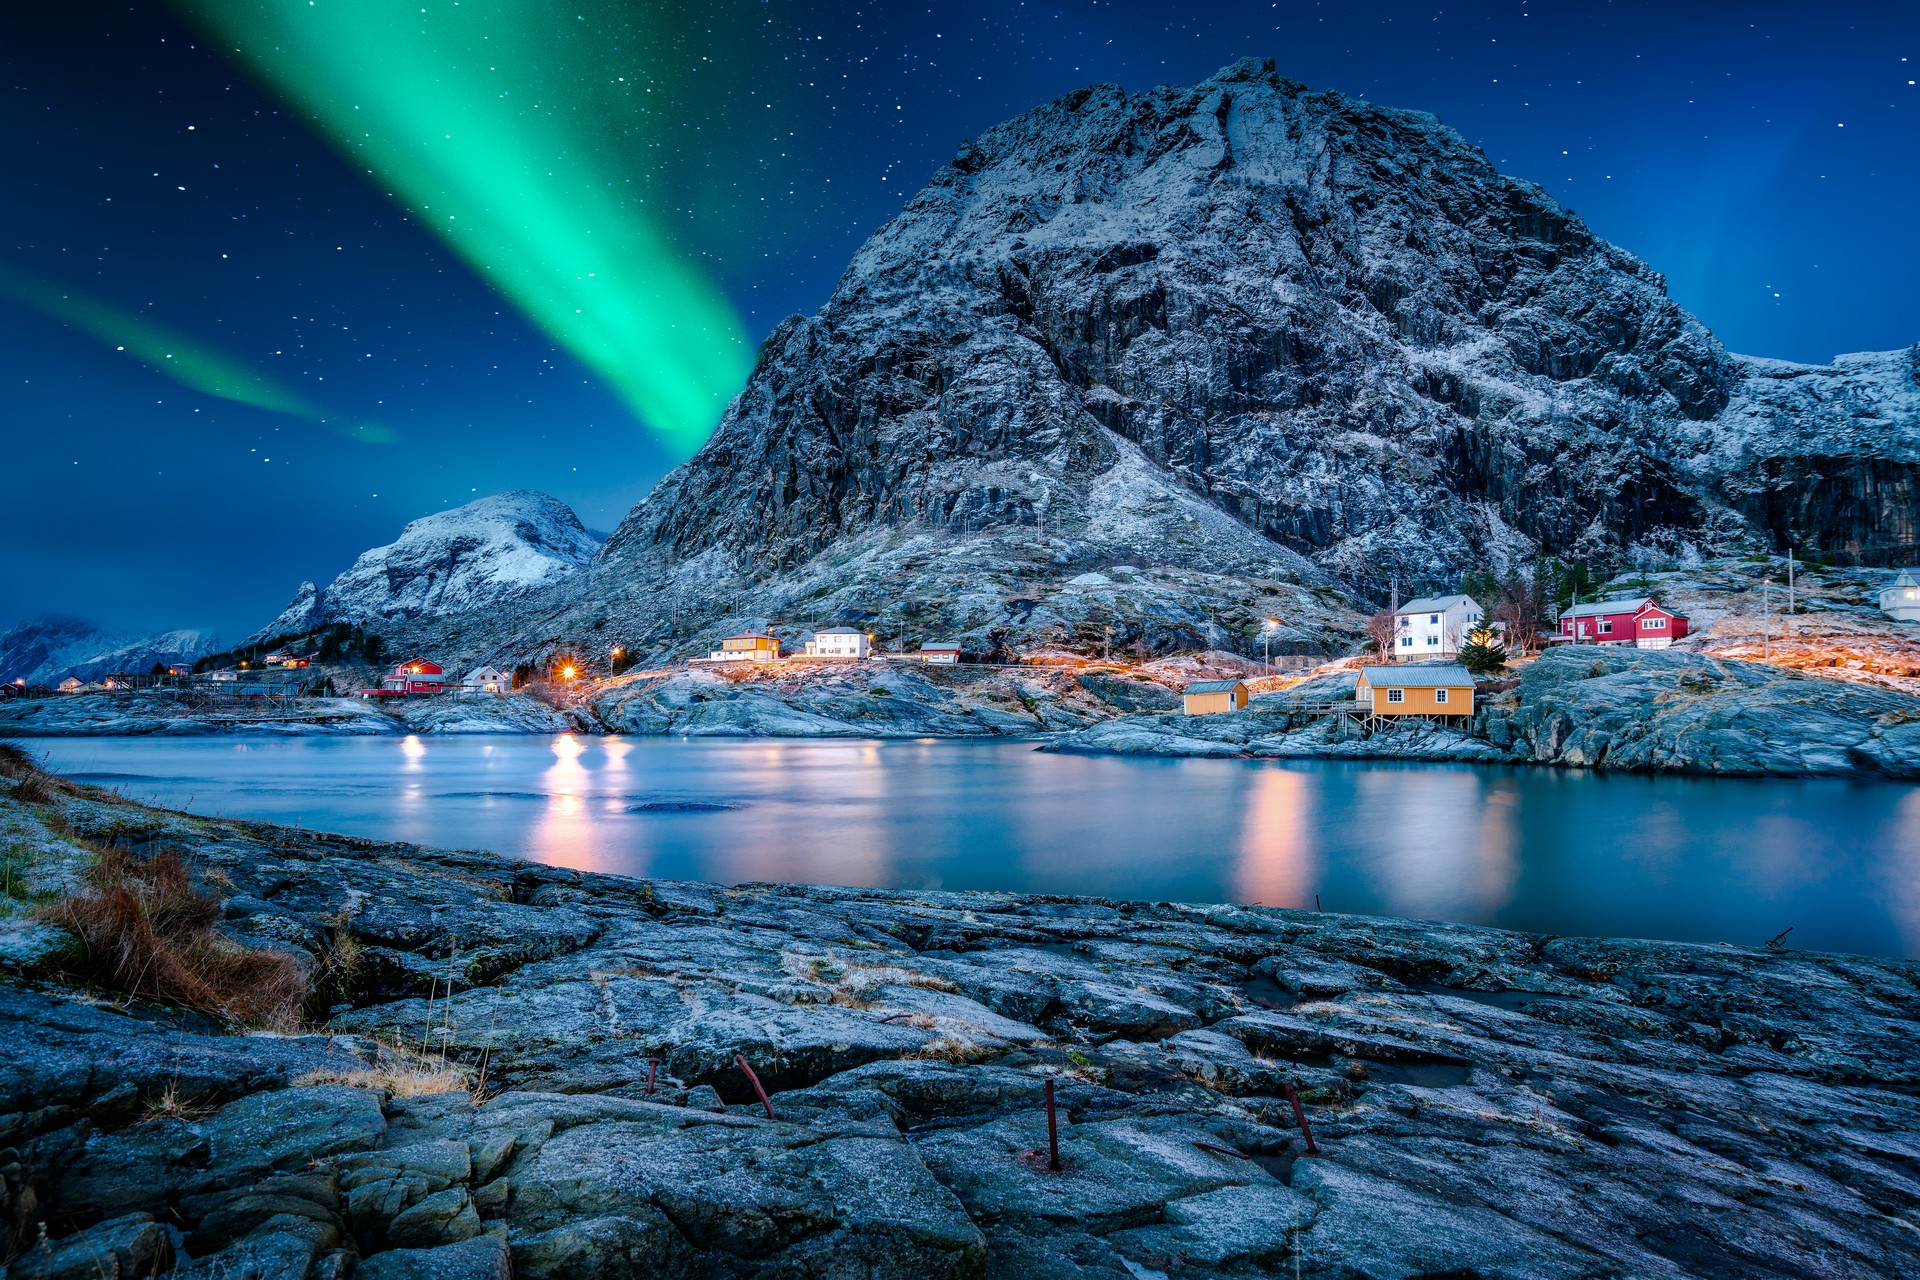 Amazing deal on Northern Lights experience you shouldn't miss